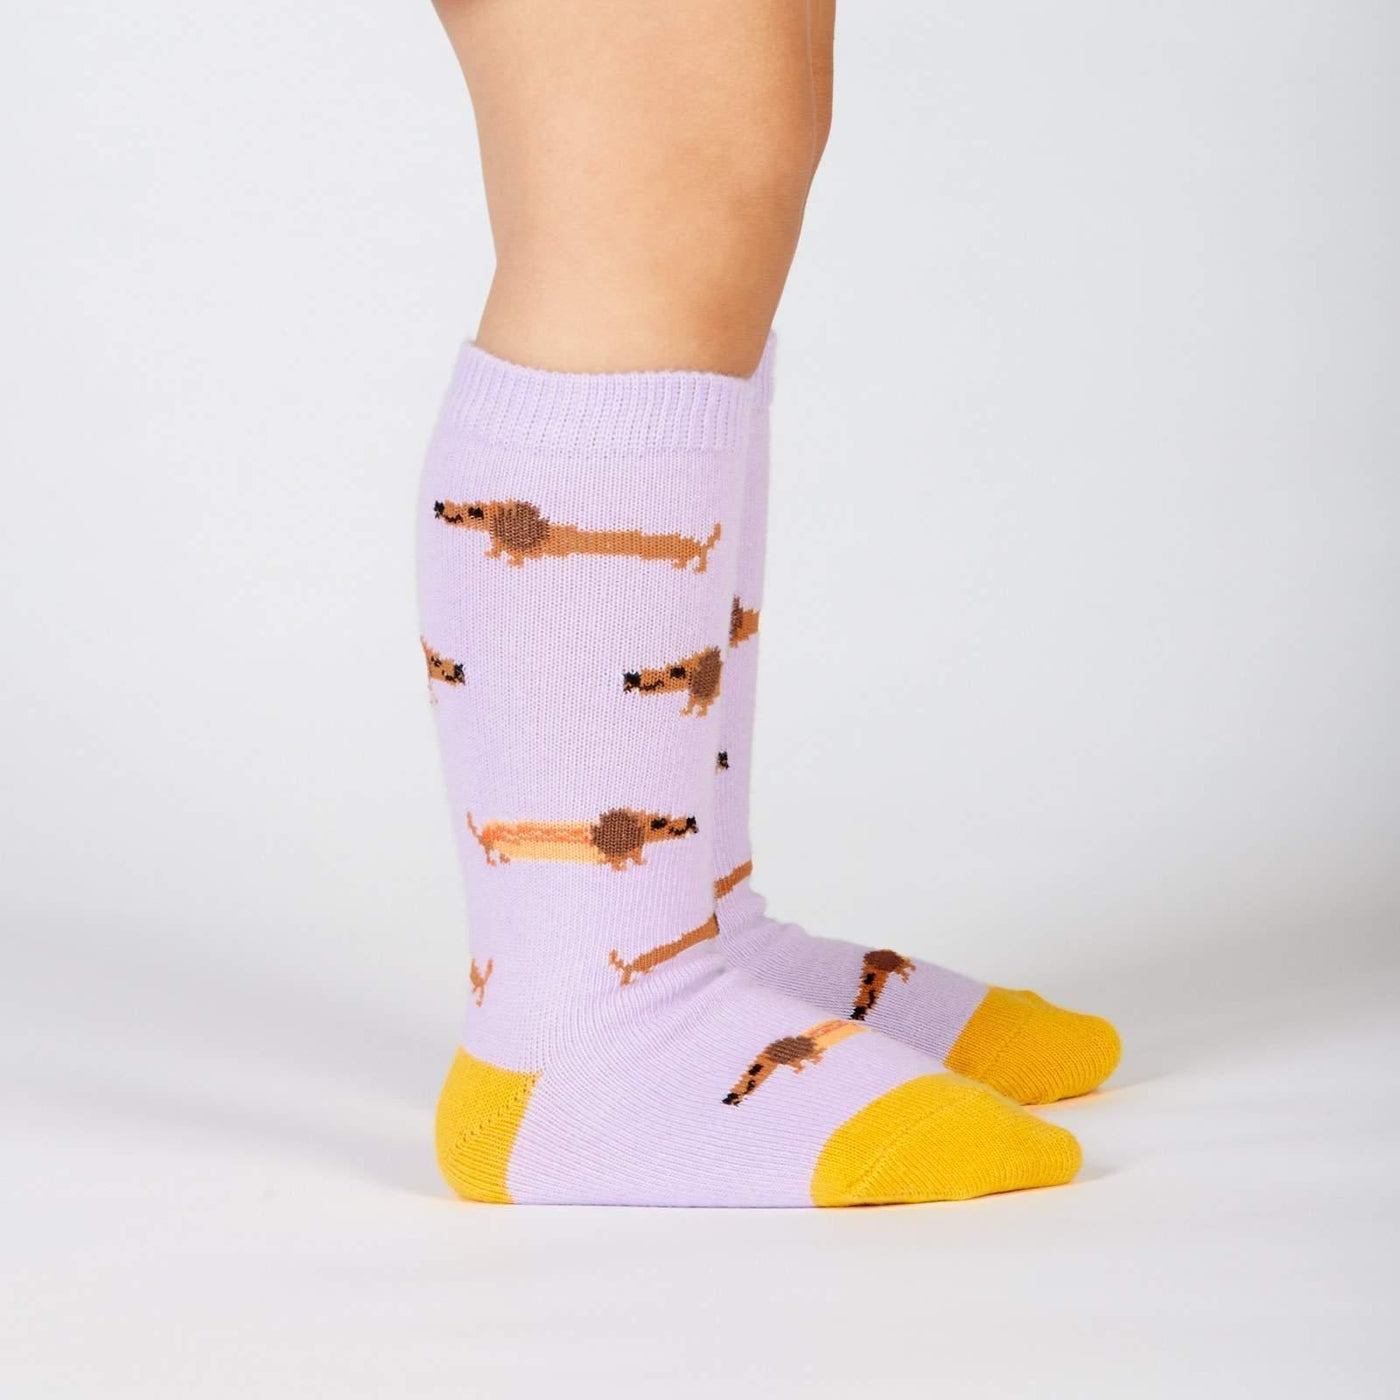 Hot Dogs, Toddler Knee-high - Sock It To Me - The Sock Monster